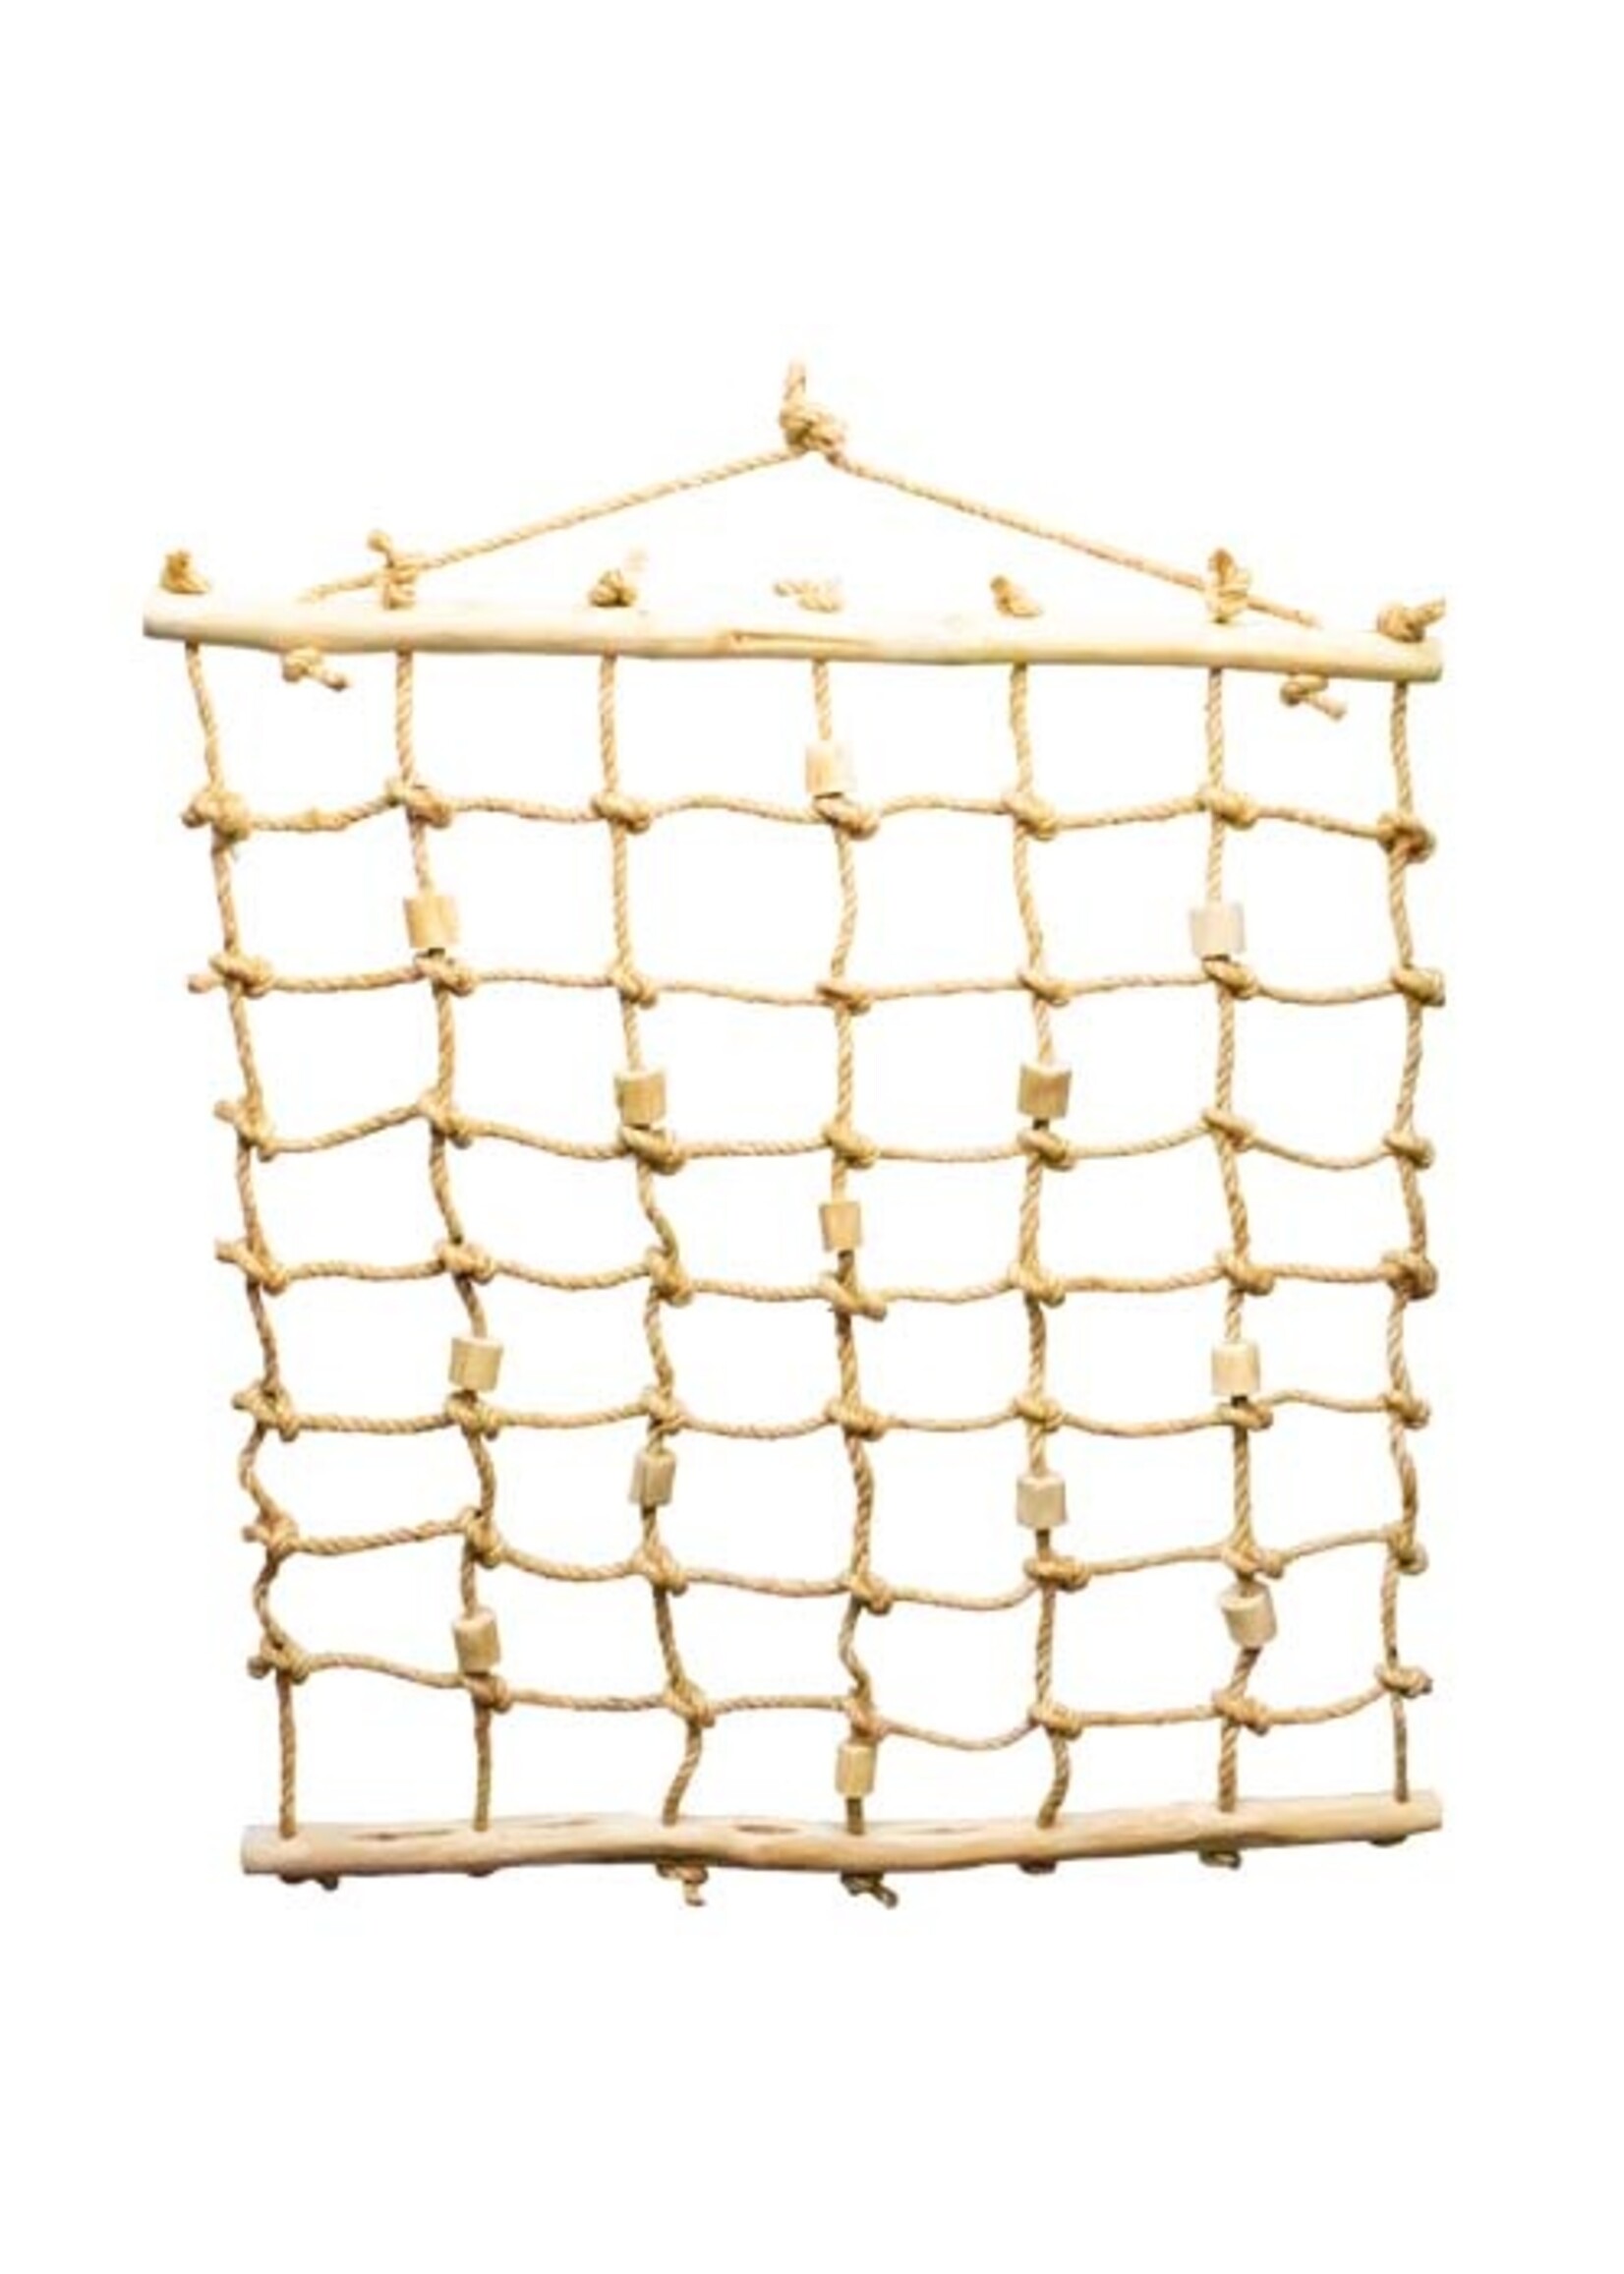 Kings Cages Kings Cages HEMP CLIMBING CARGO NET LADDERS K648 Large